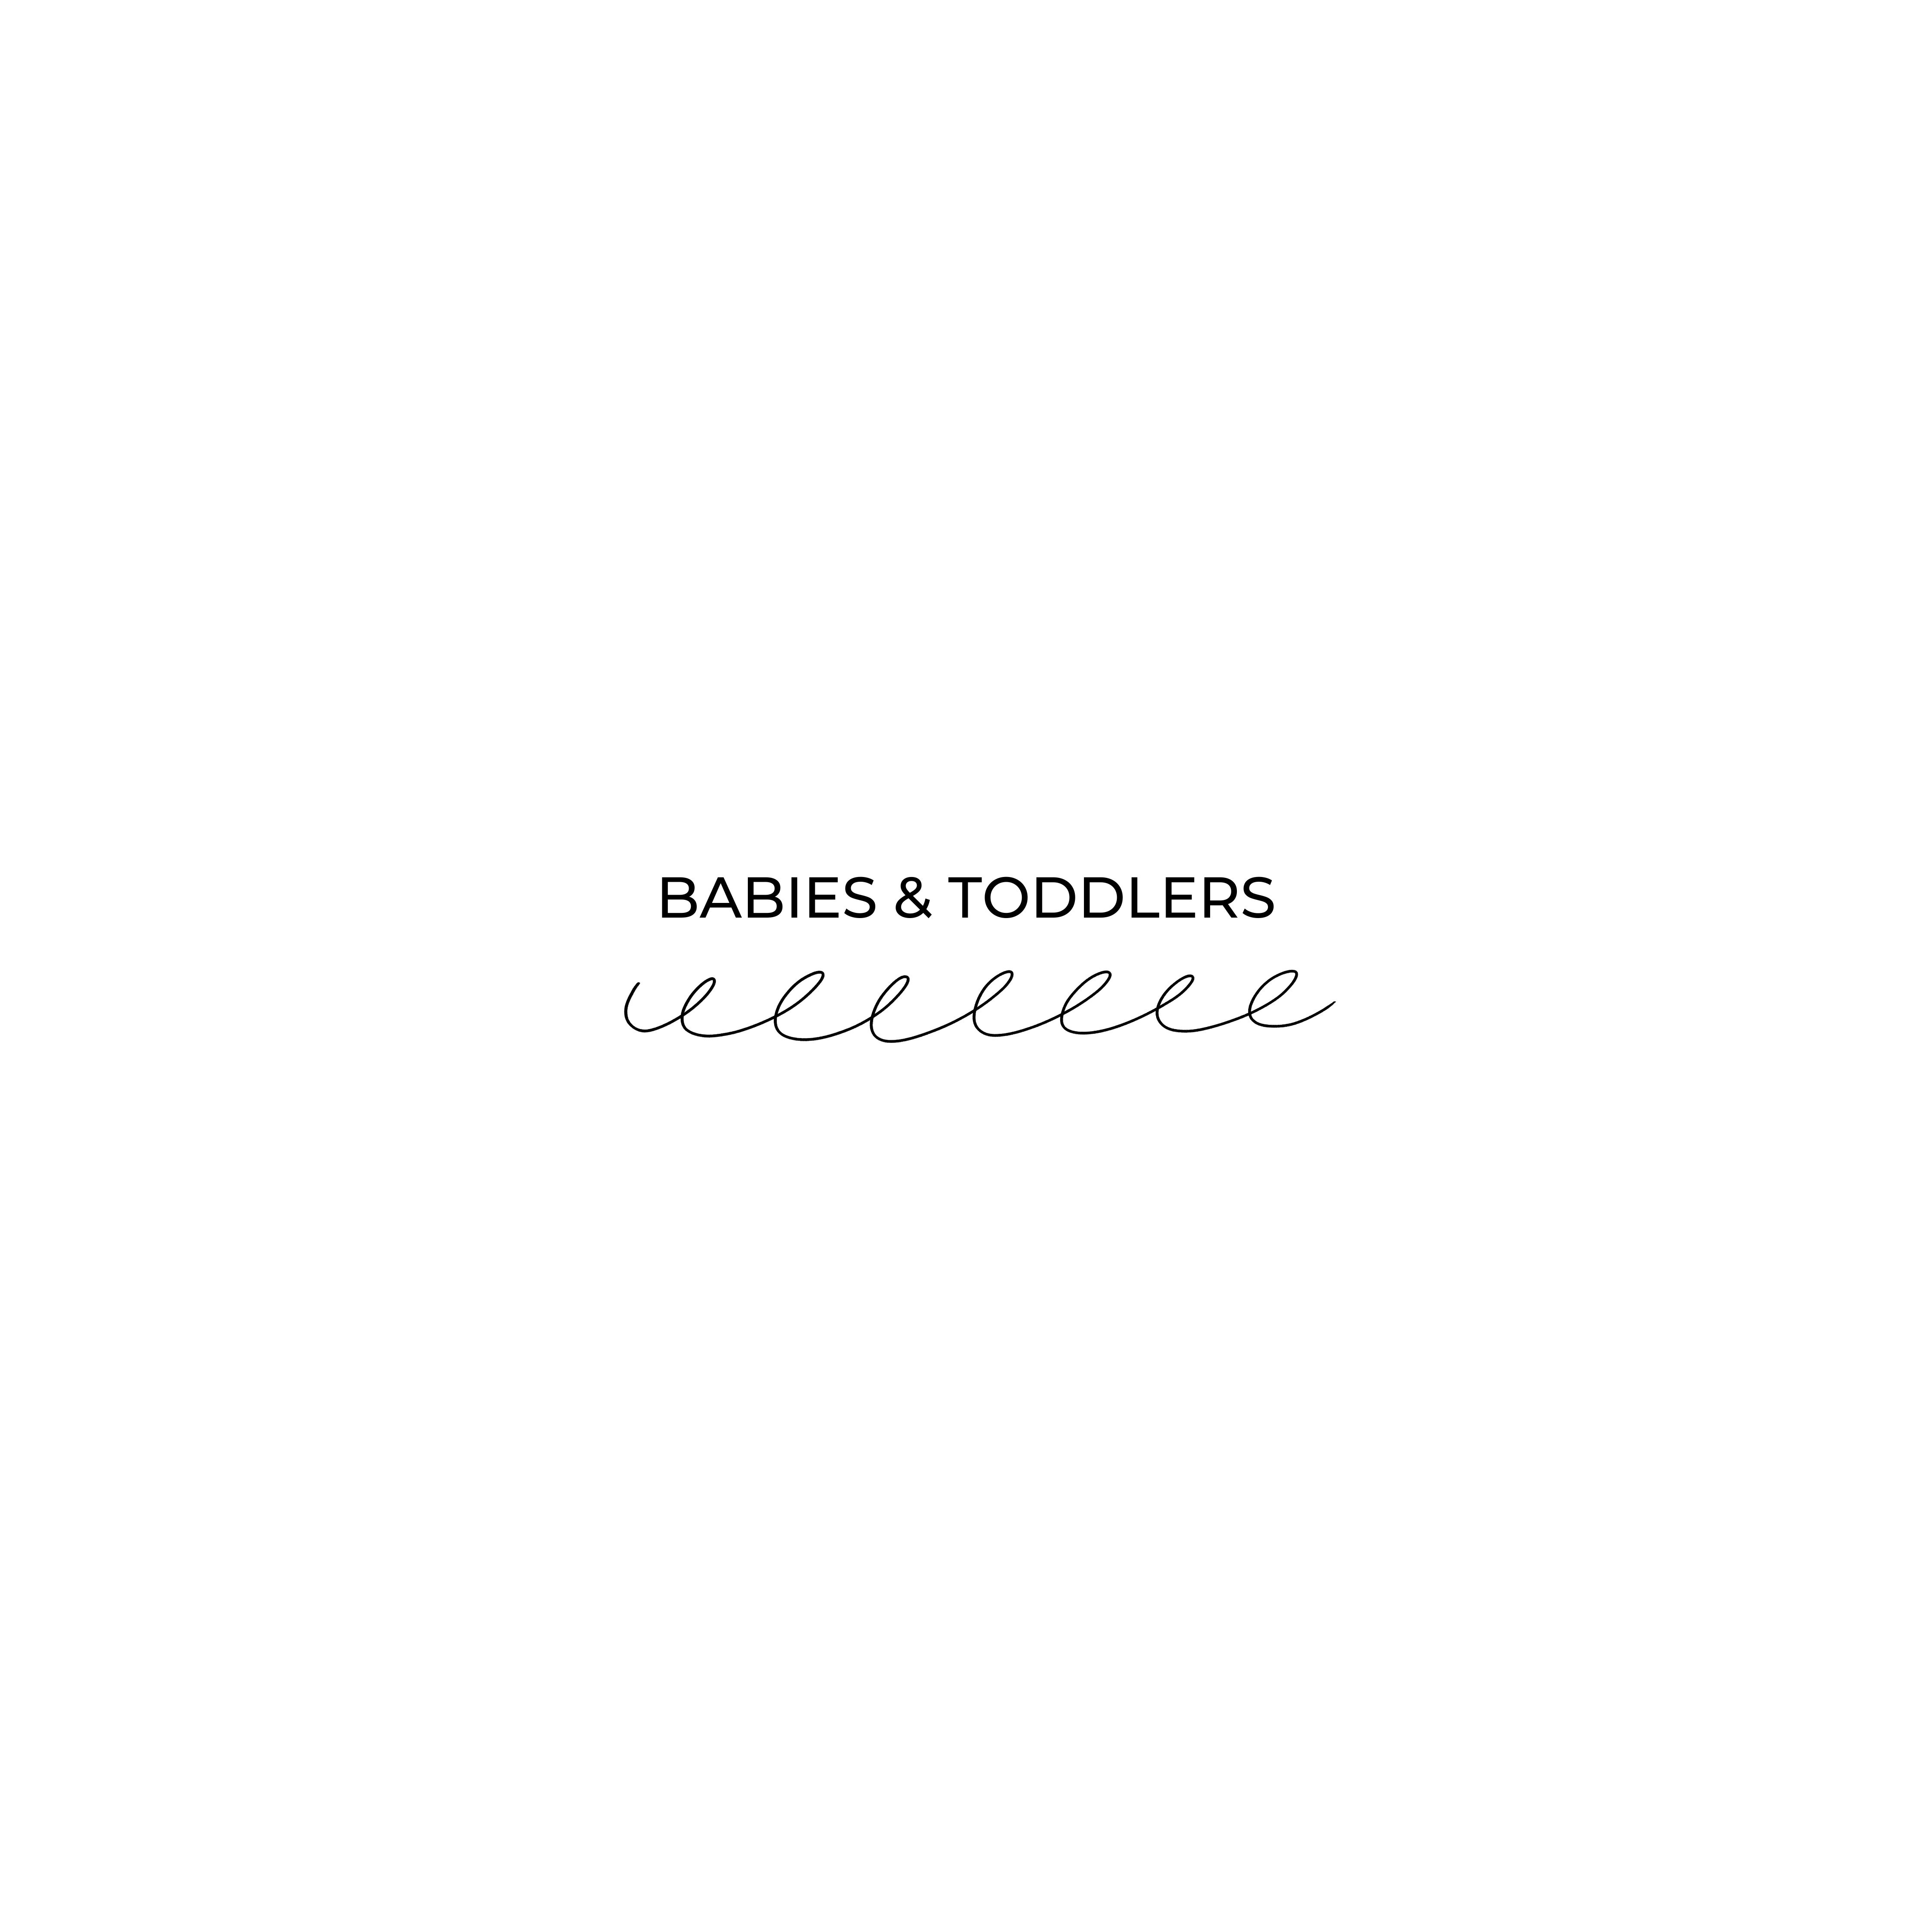 BABIES & TODDLERS